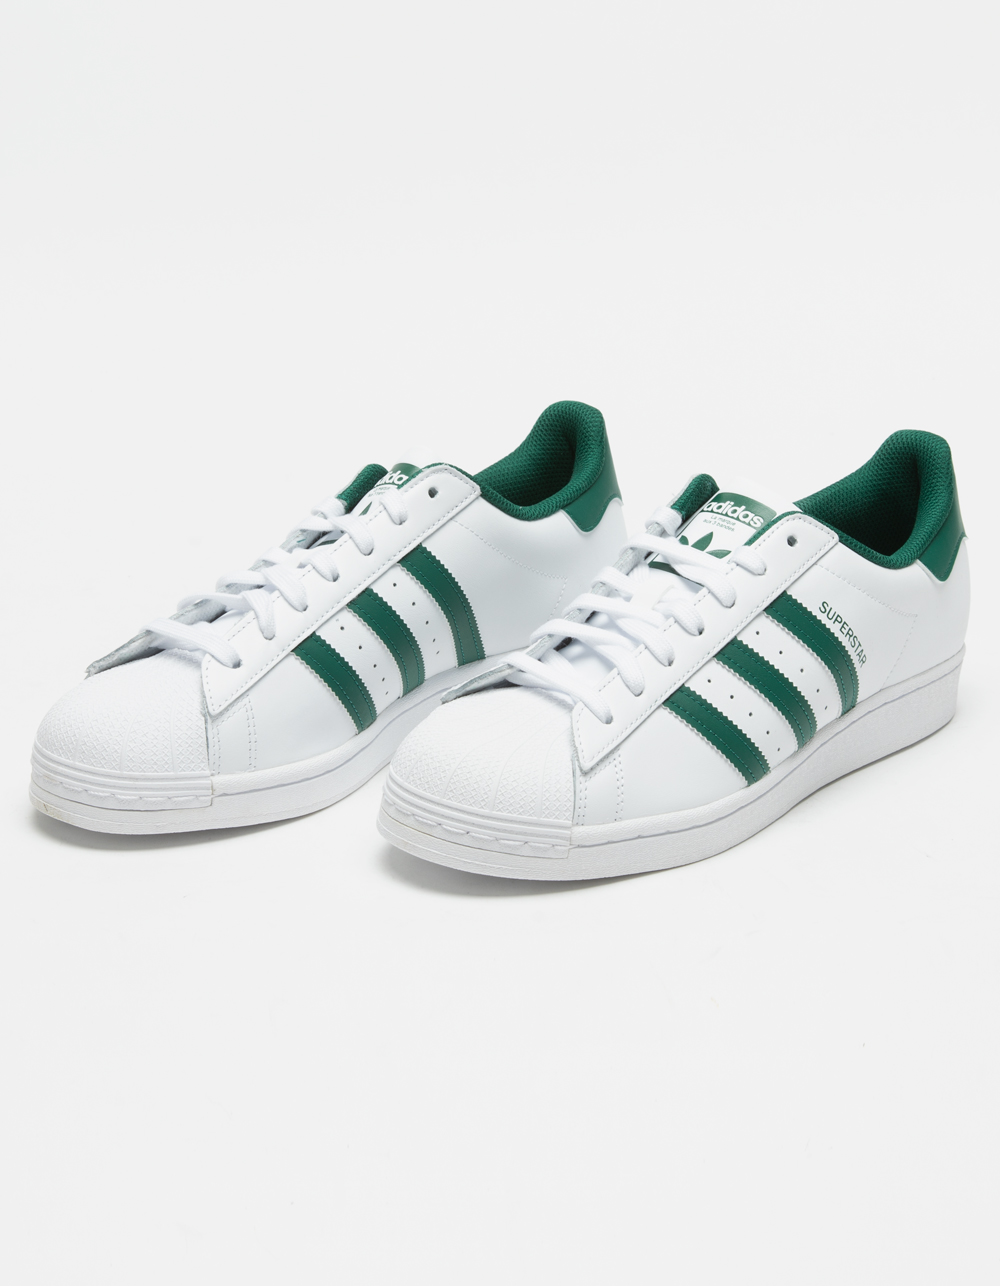 ADIDAS Superstar Shoes - WHITE COMBO | Tillys